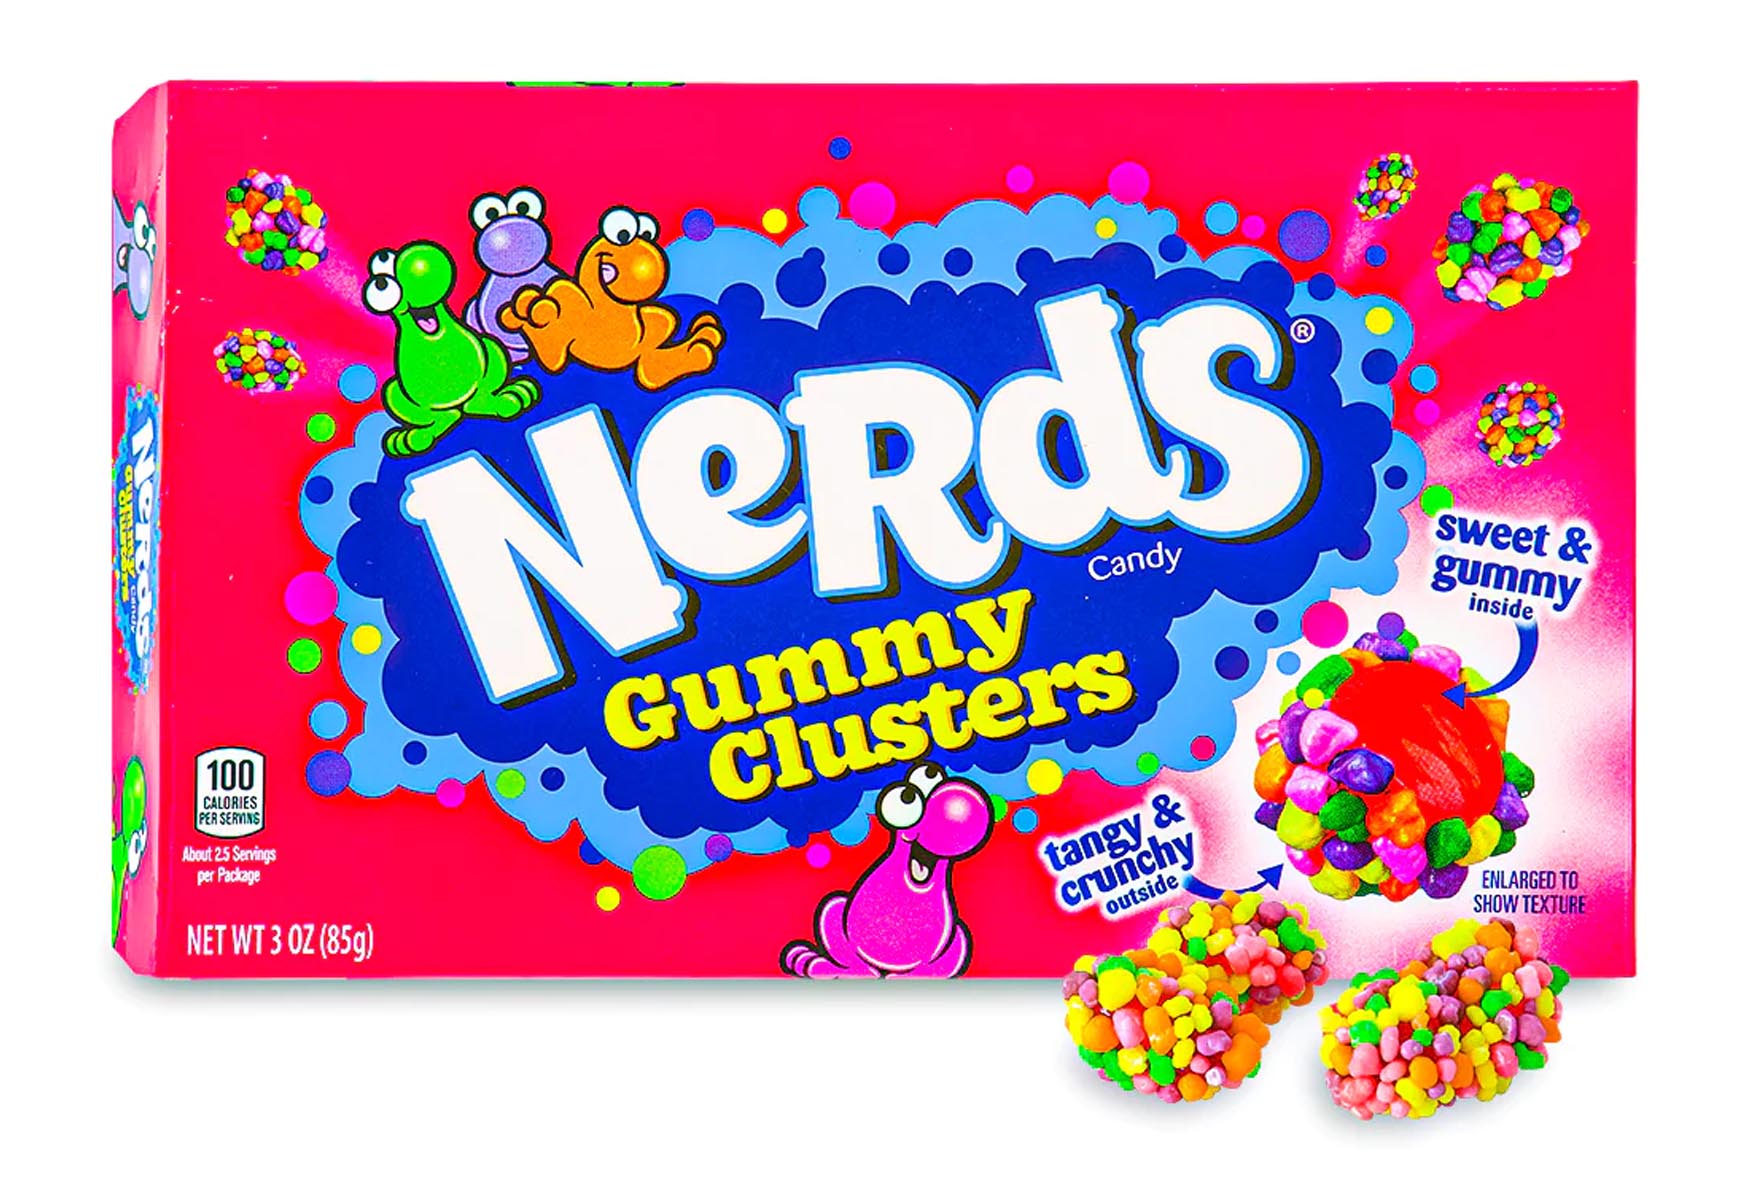 18 Nerds Gummy Clusters Nutrition Facts - Facts.net